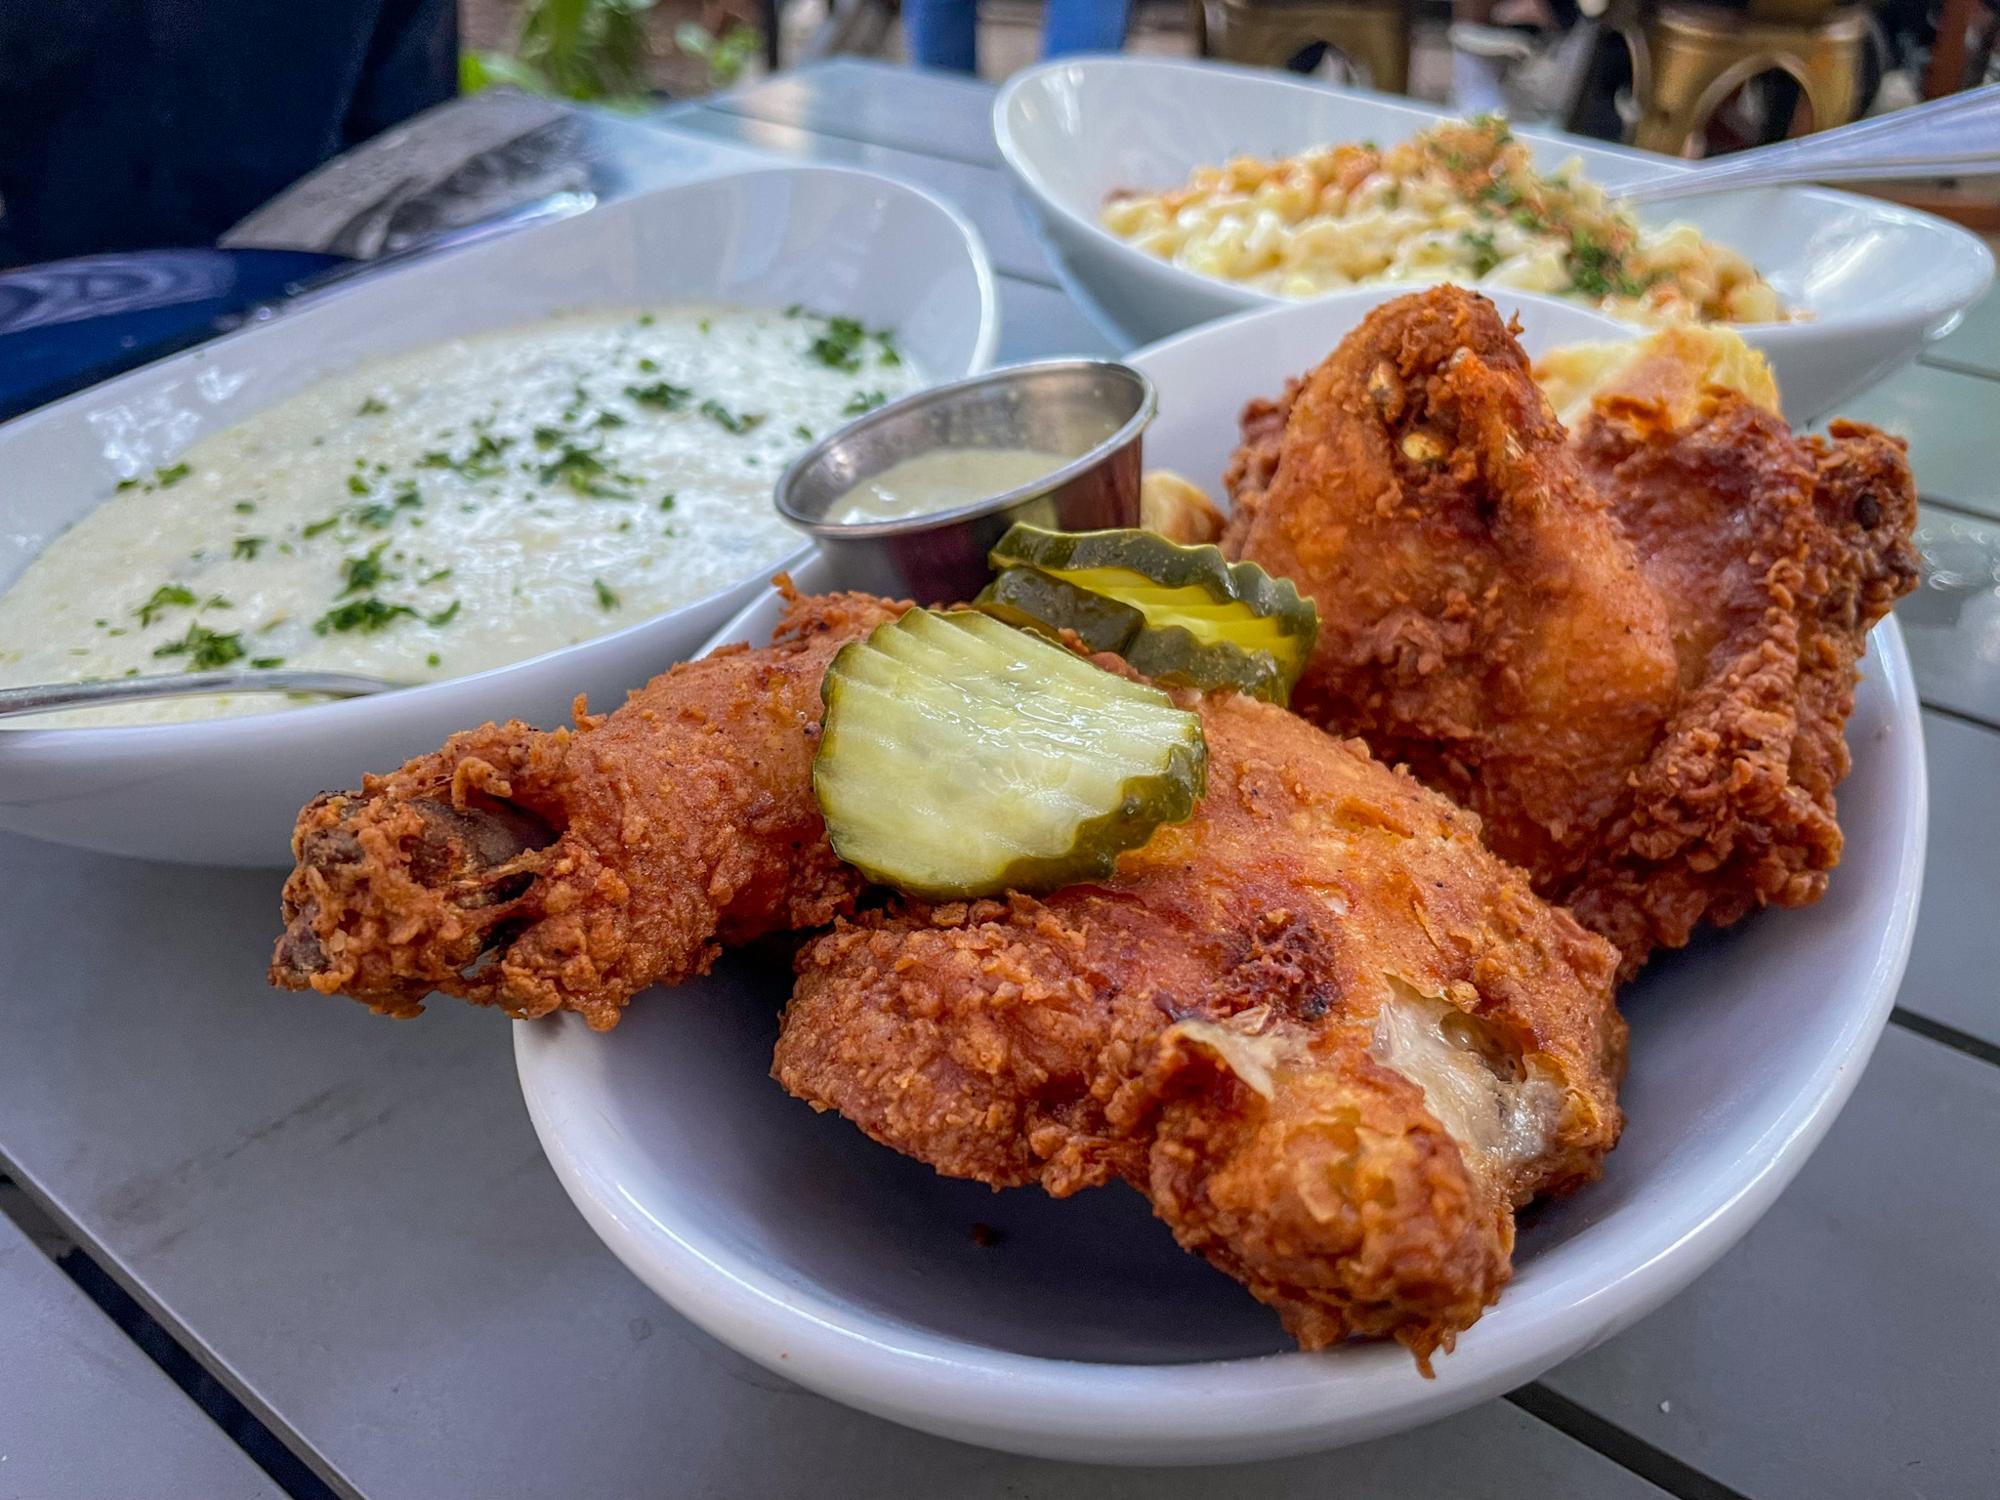 Fried Chicken, Grits, and Mac